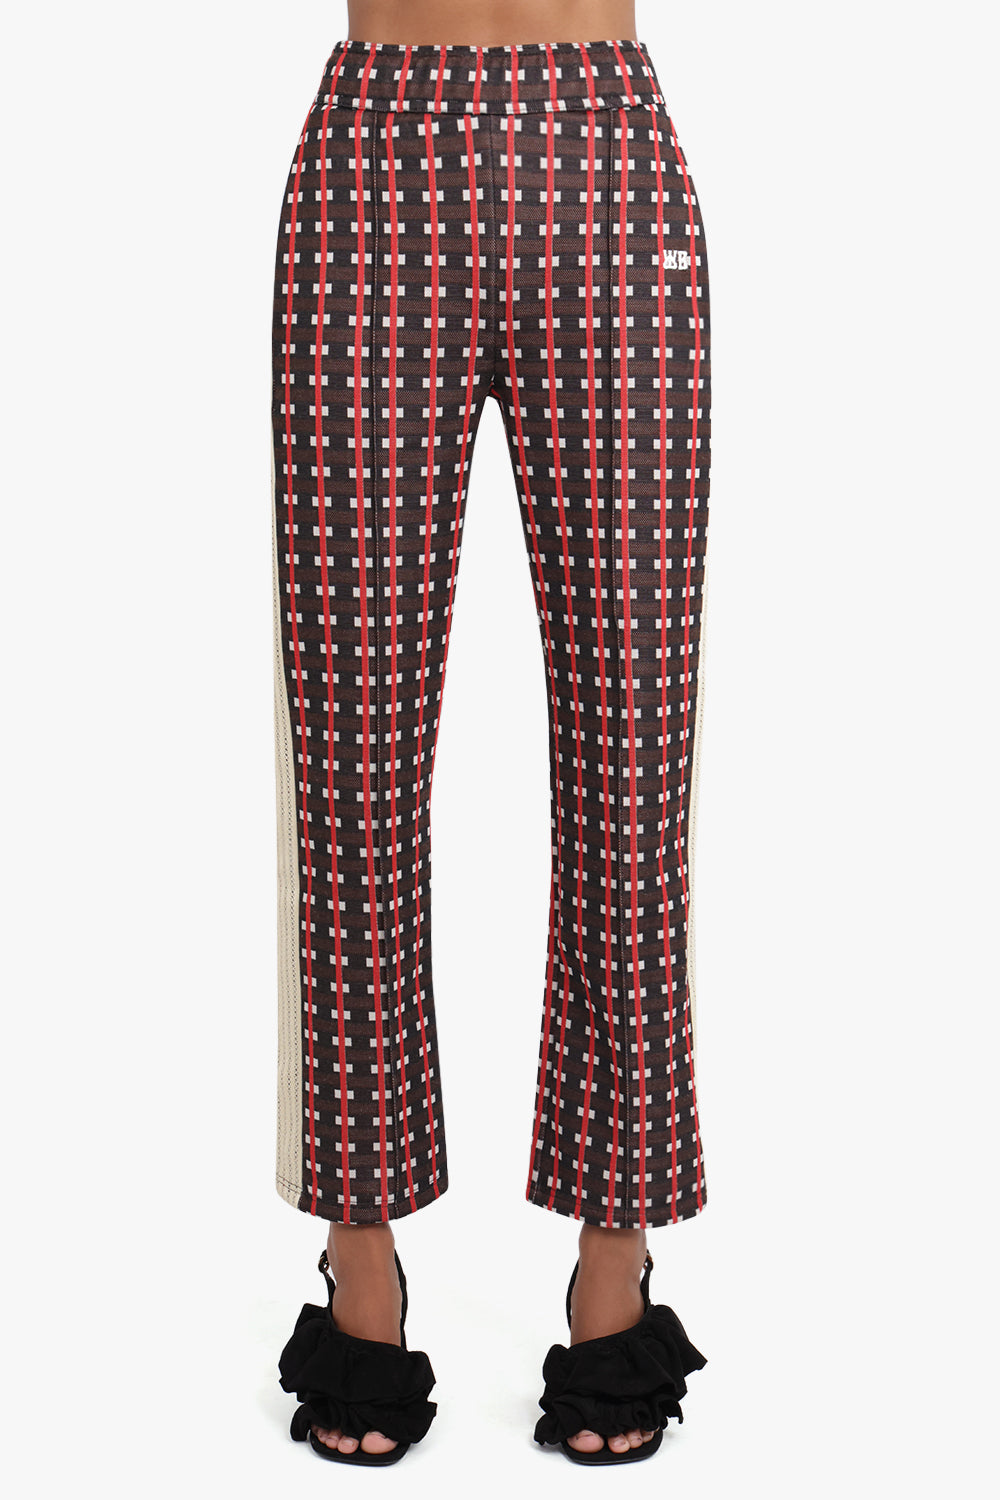 WALES BONNER RTW Power Trackpant | Brown/Red